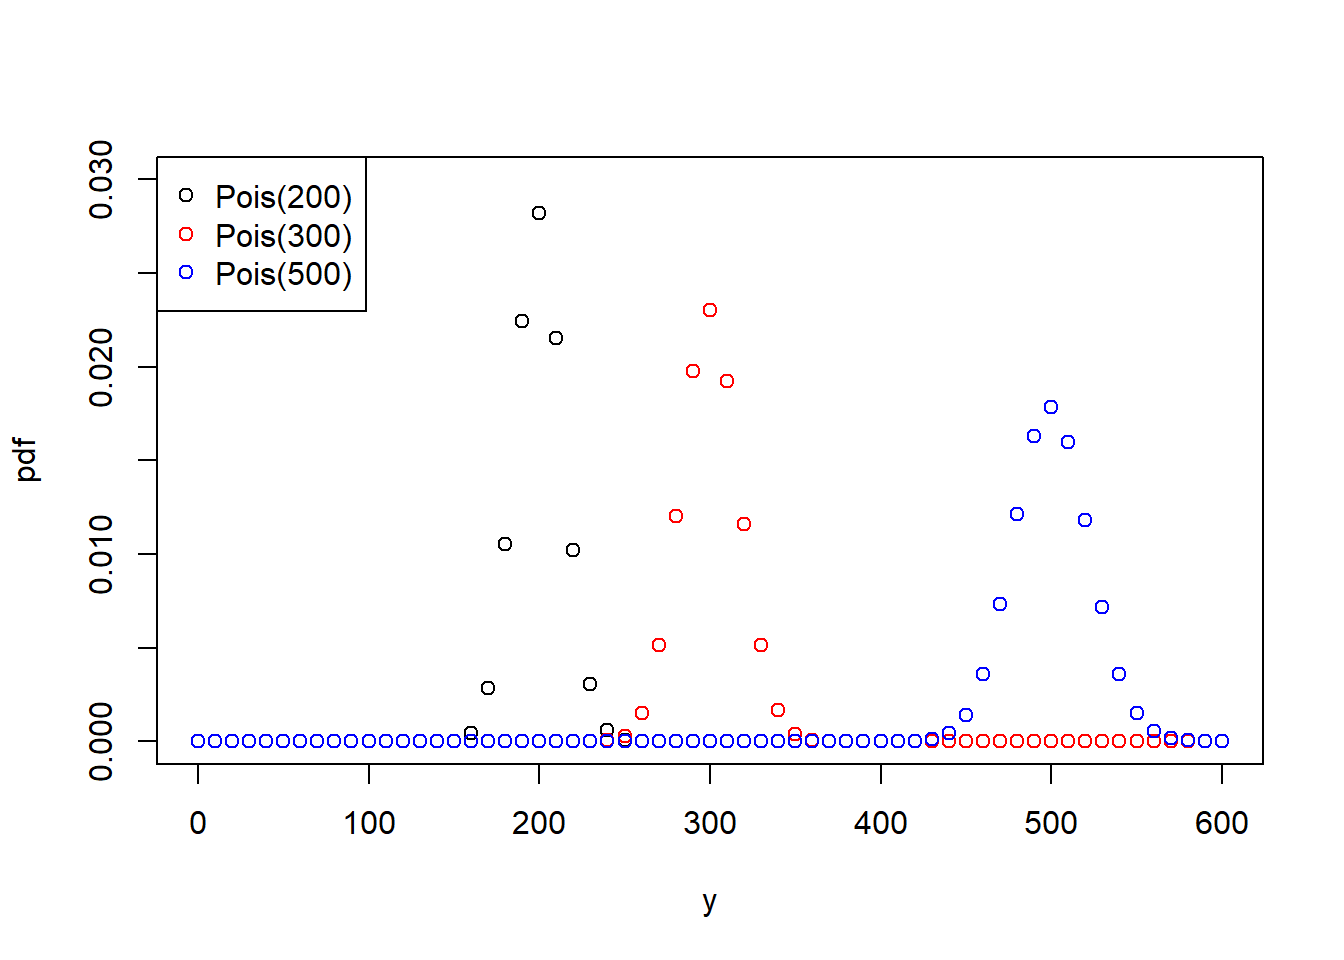 Left: Probability density function (pdf) of the **Poisson distribution** of a response variable $y$ for three variants of the parameter $\lambda$. Right: Probability density function (pdf) of the **binomial distribution** of a response variable $y$, normalised by the number of "trials" $n$, for three variants of the parameter $\pi$.